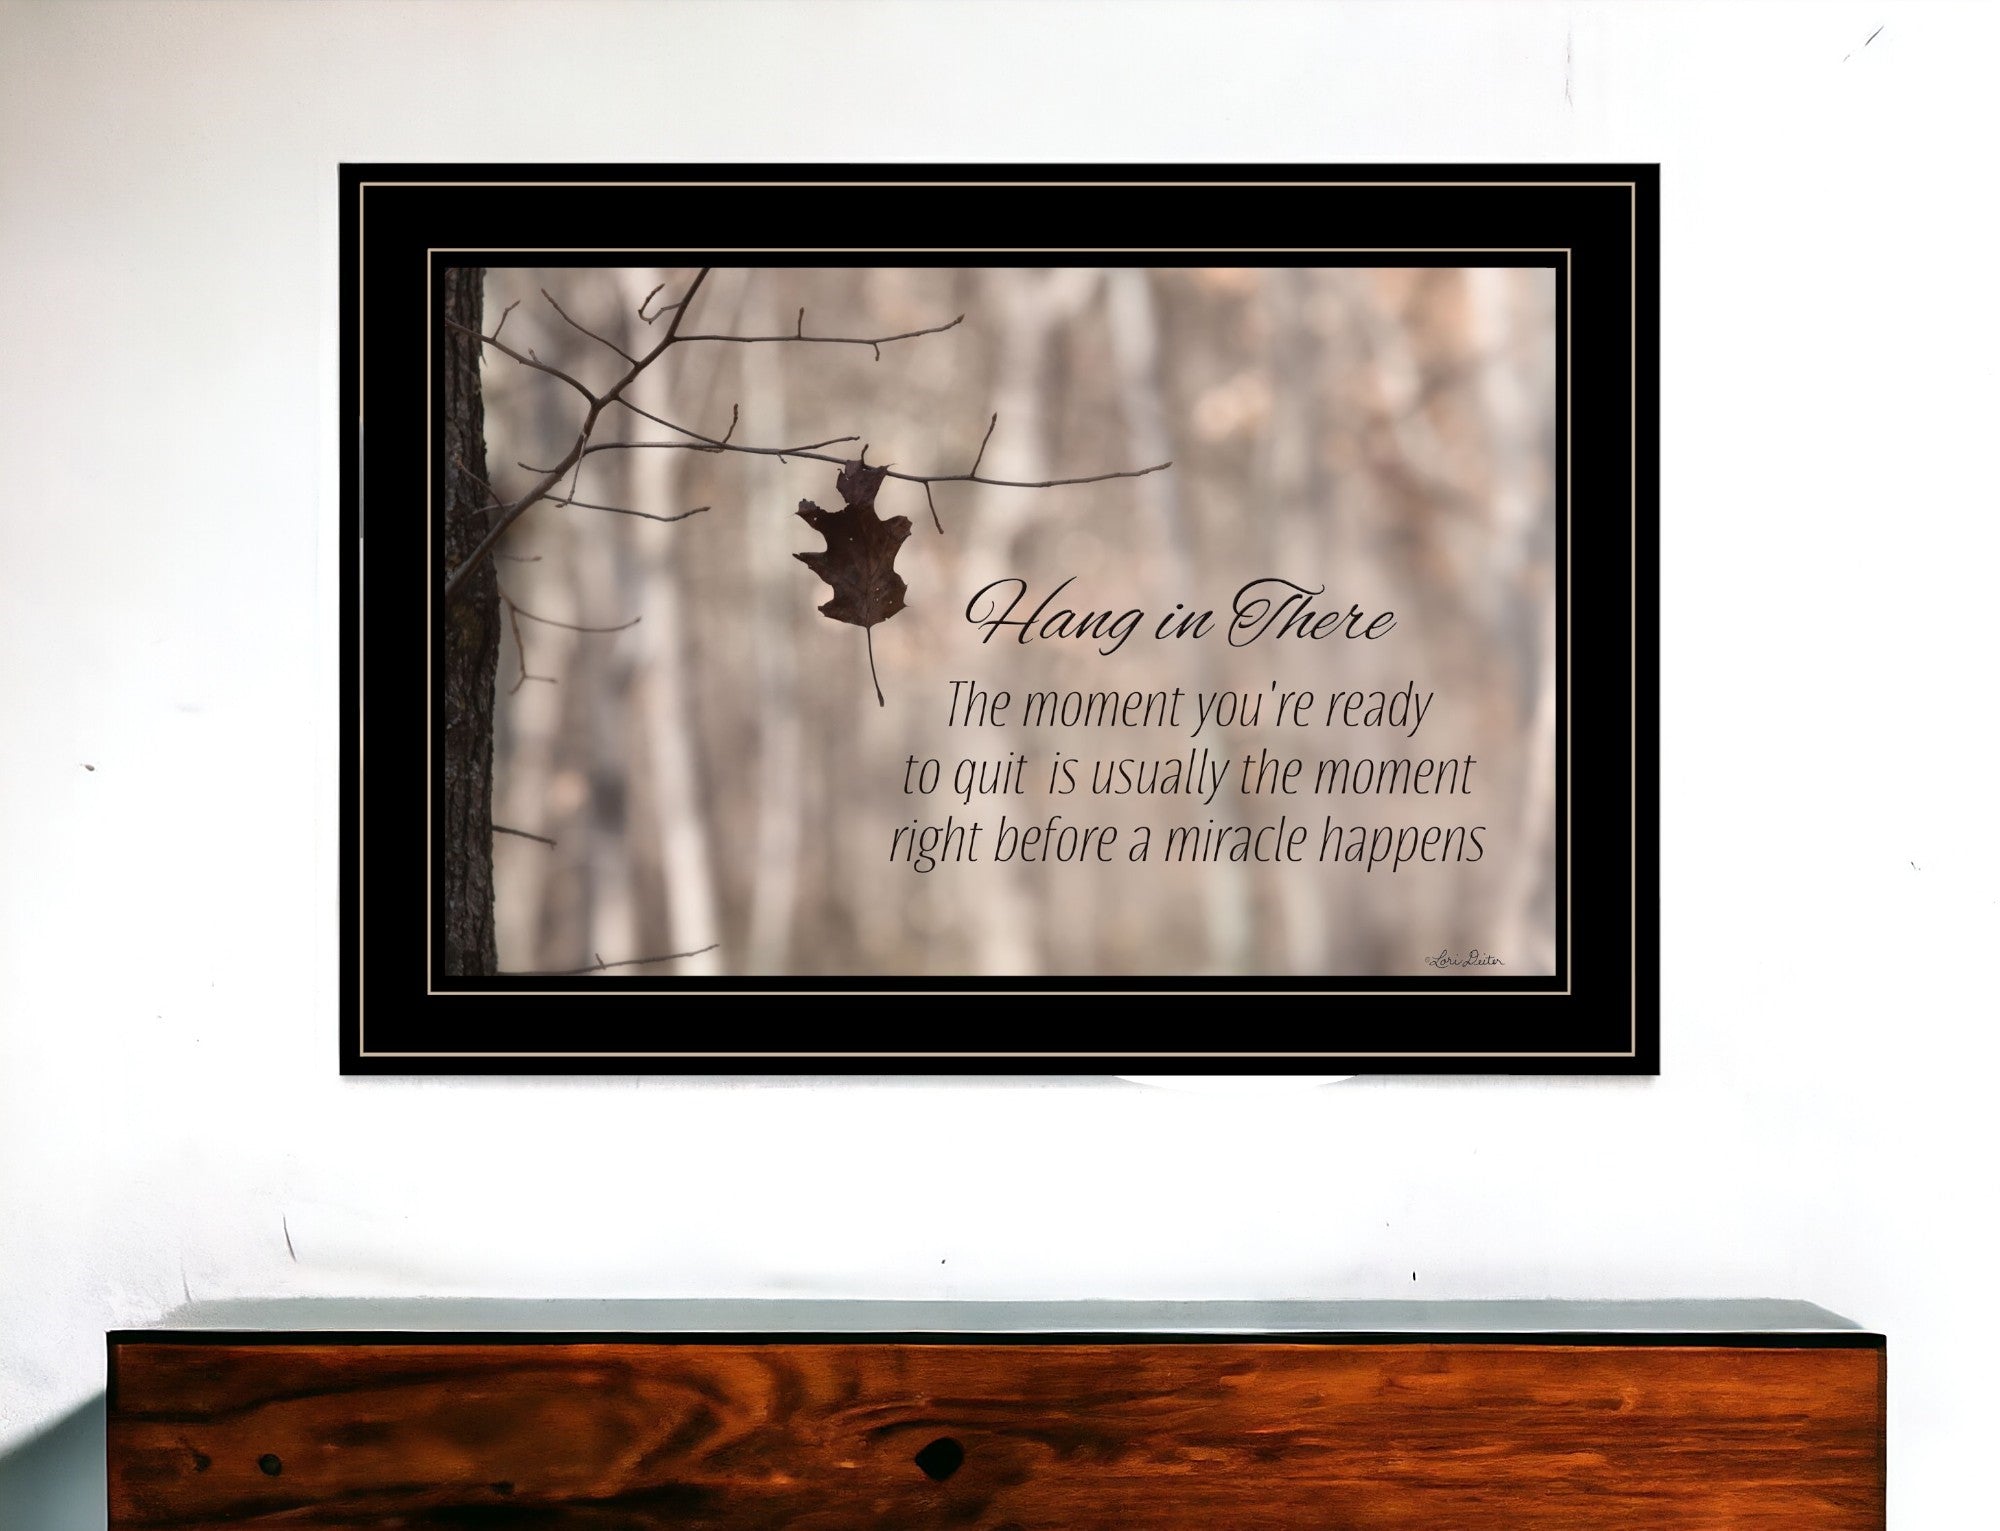 Hang in There 2 Black Framed Print Wall Art